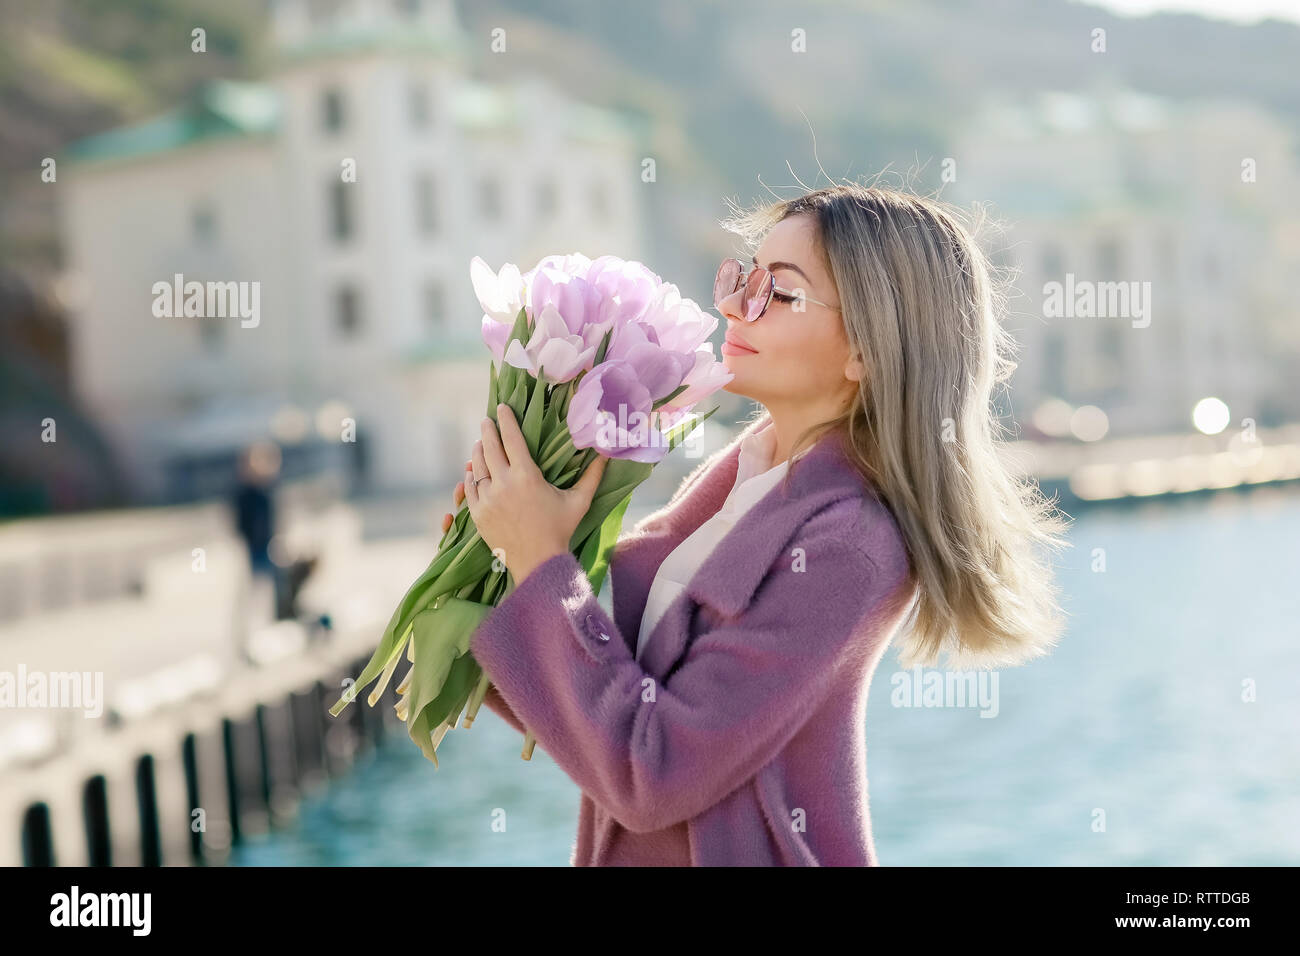 Beautiful happy woman with straight hair holding a bouquet of pink tulips one spring sunny day. Stock Photo